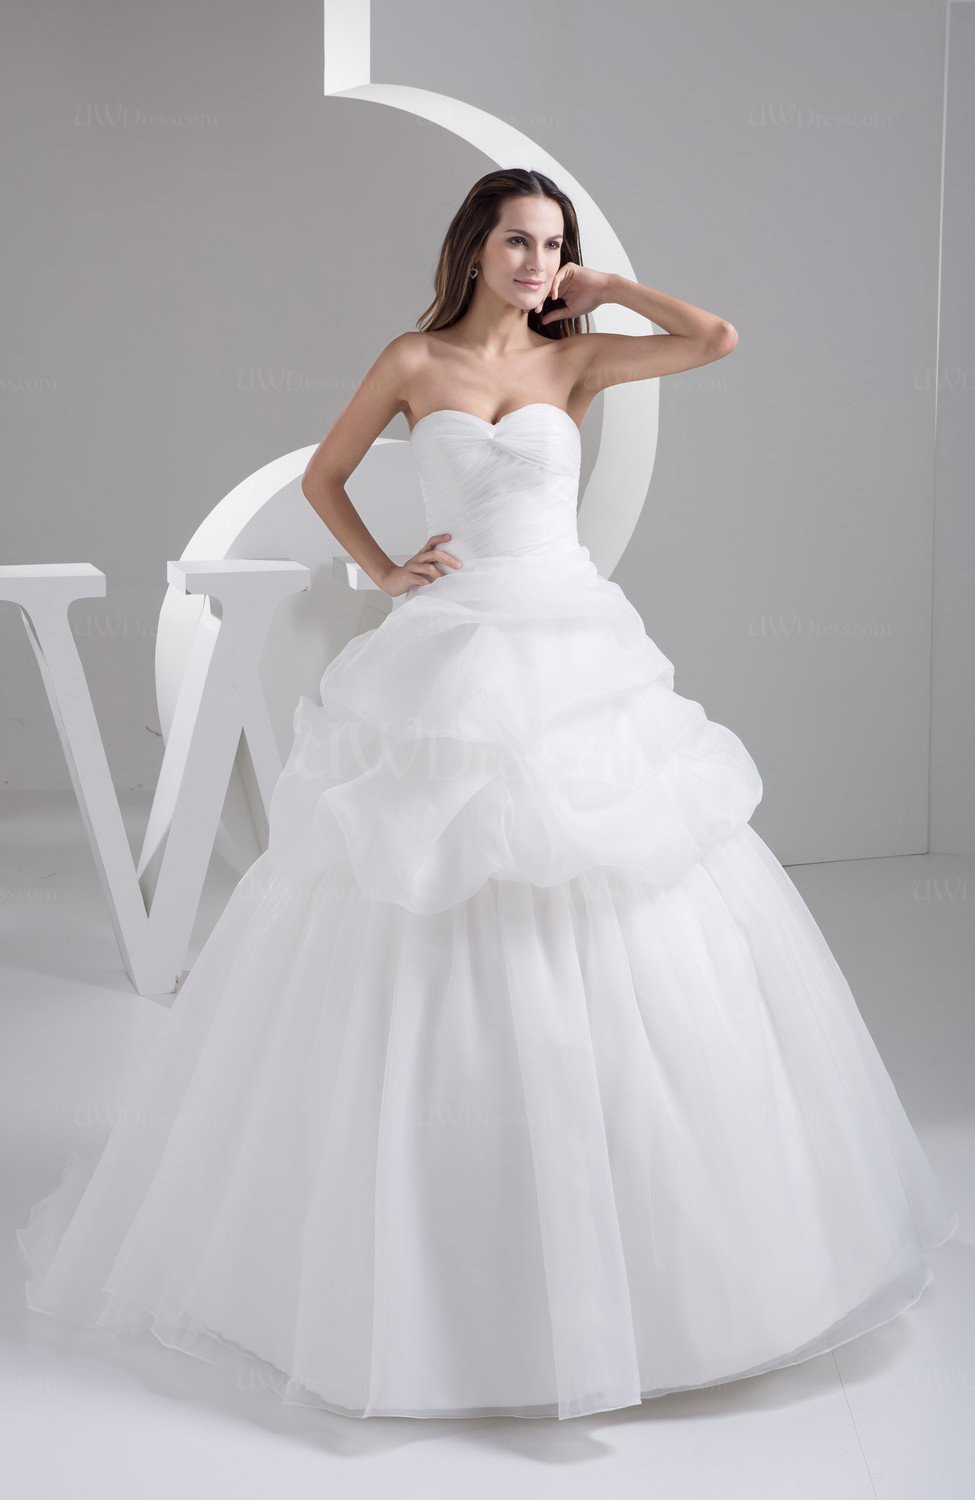 White Ball Gown Wedding Dresses
 White Ball Gown Bridal Gowns Open Back Summer Strapless